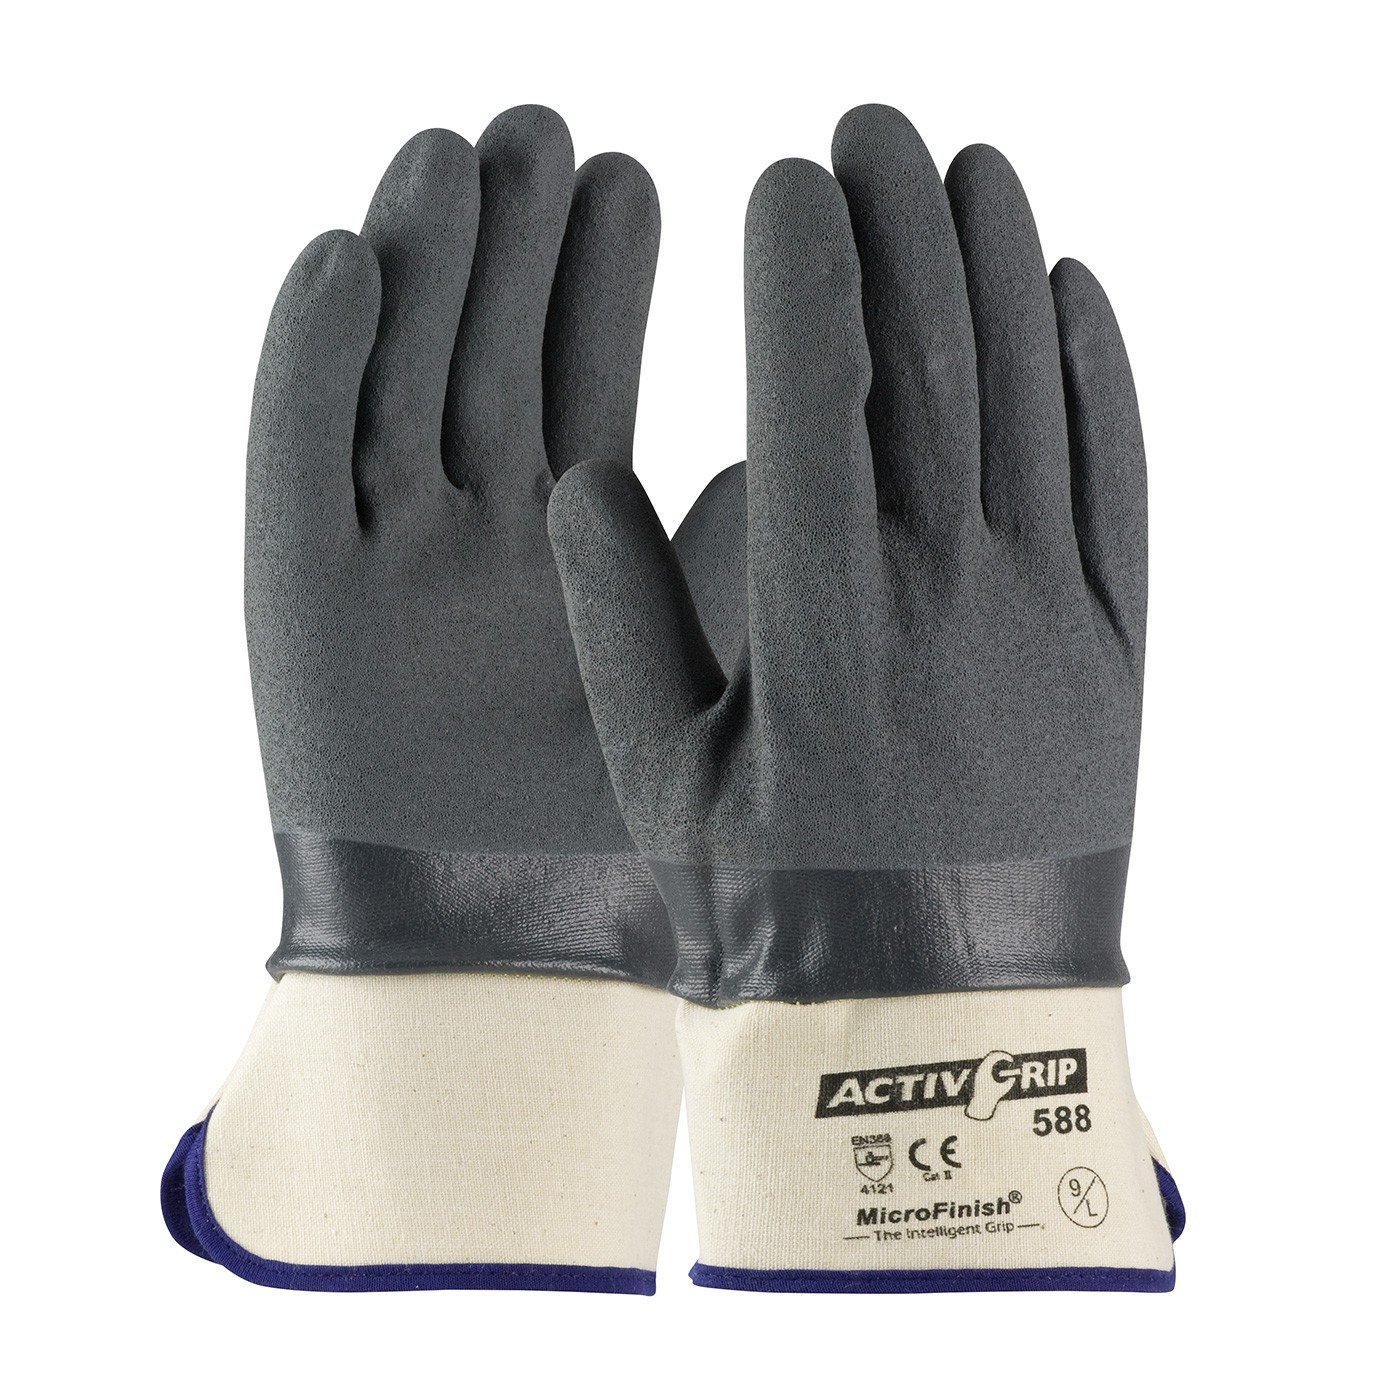 ActivGrip™ Nitrile Coated Glove with Cotton Liner and MicroFinish Grip - Safety Cuff  (#56-AG588)